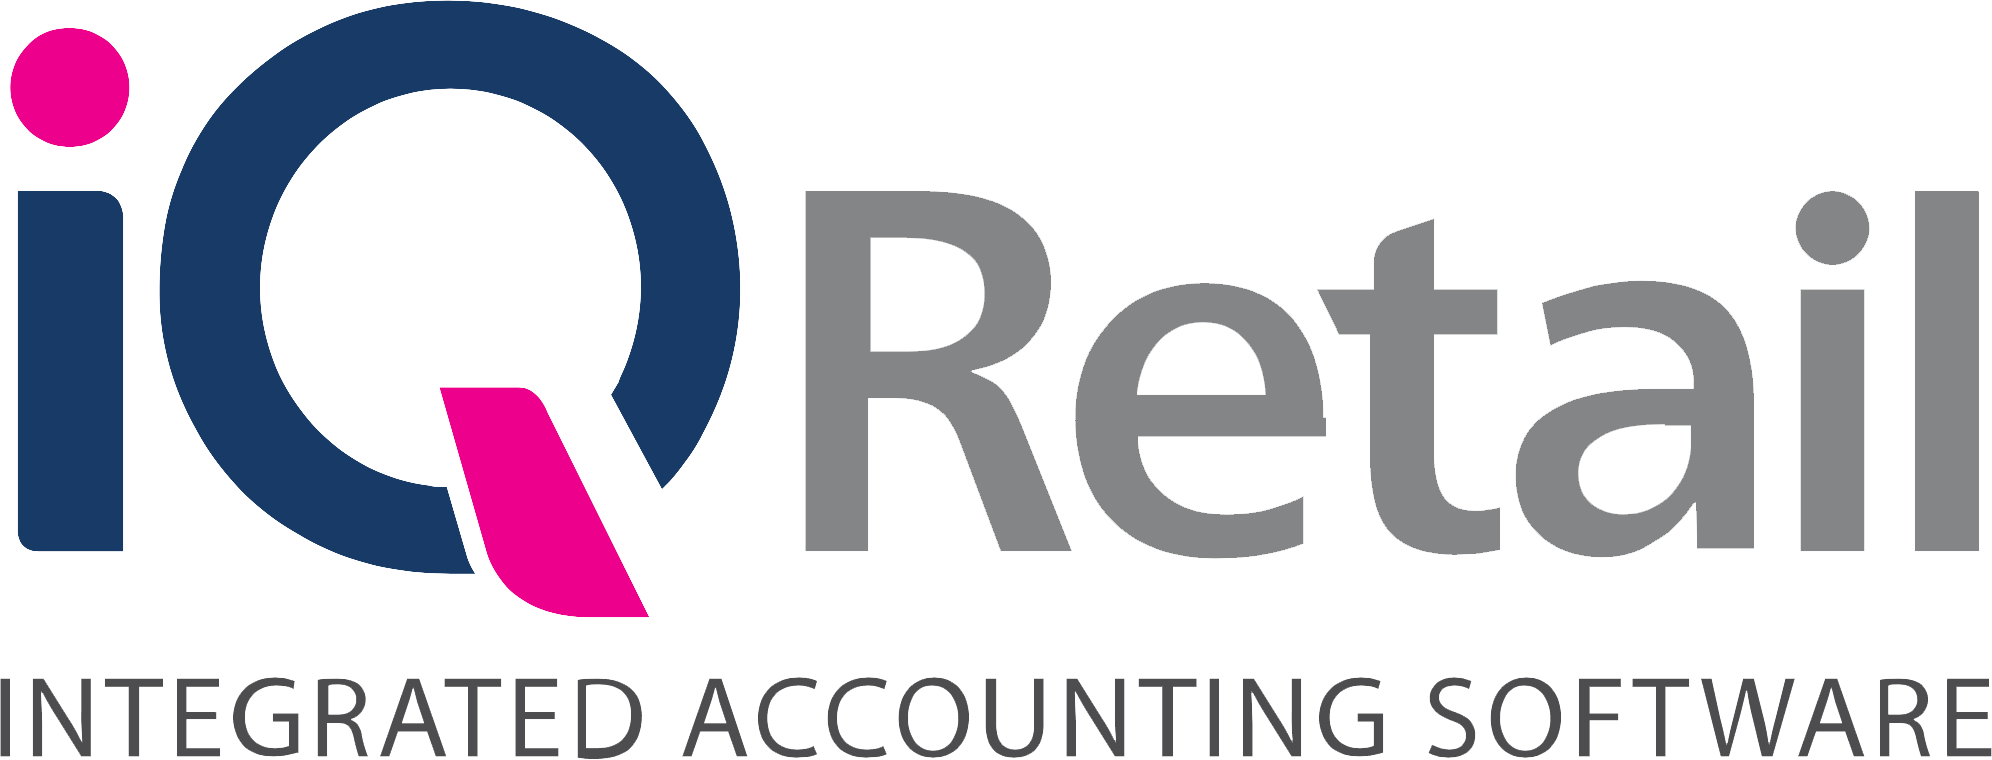 Acuant Logo - Account Software | POS | Financial Accounting Software – IQ Retail